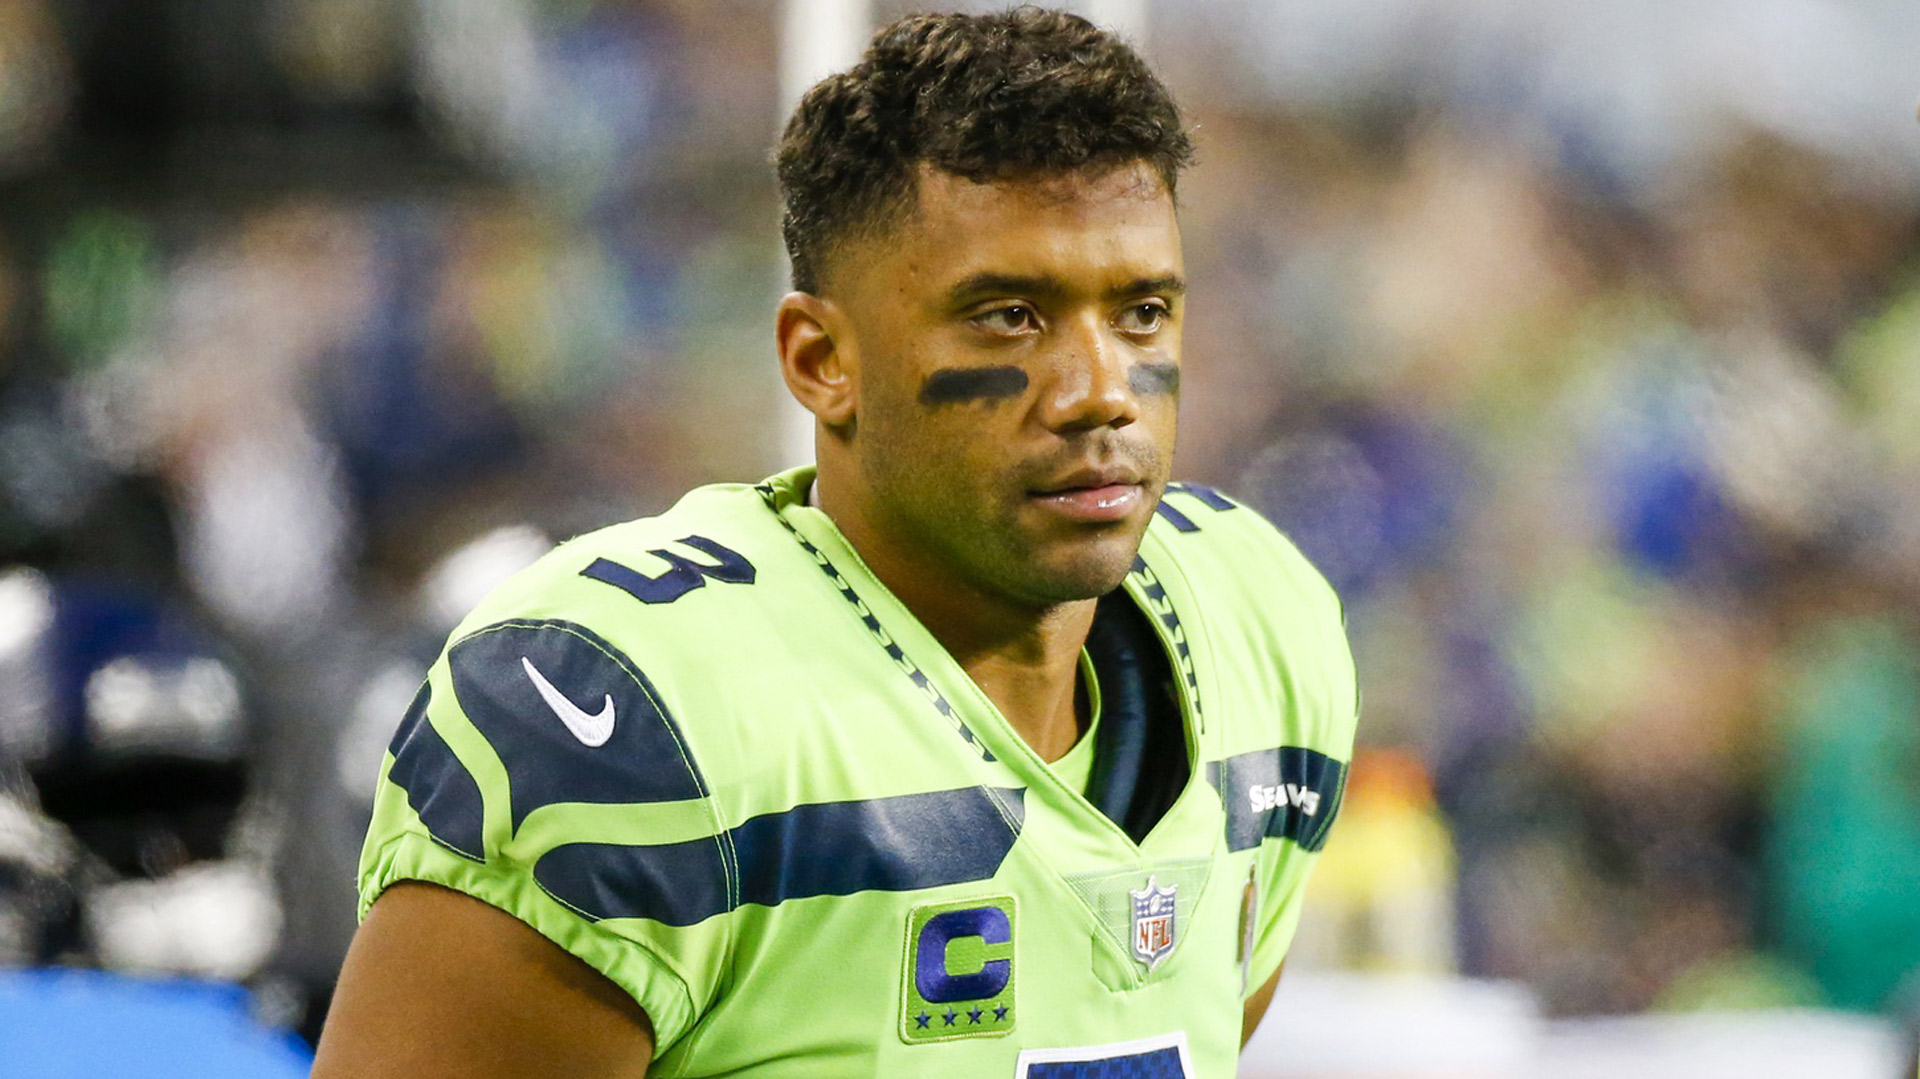 Reports Seahawks' Russell Wilson out several weeks after finger